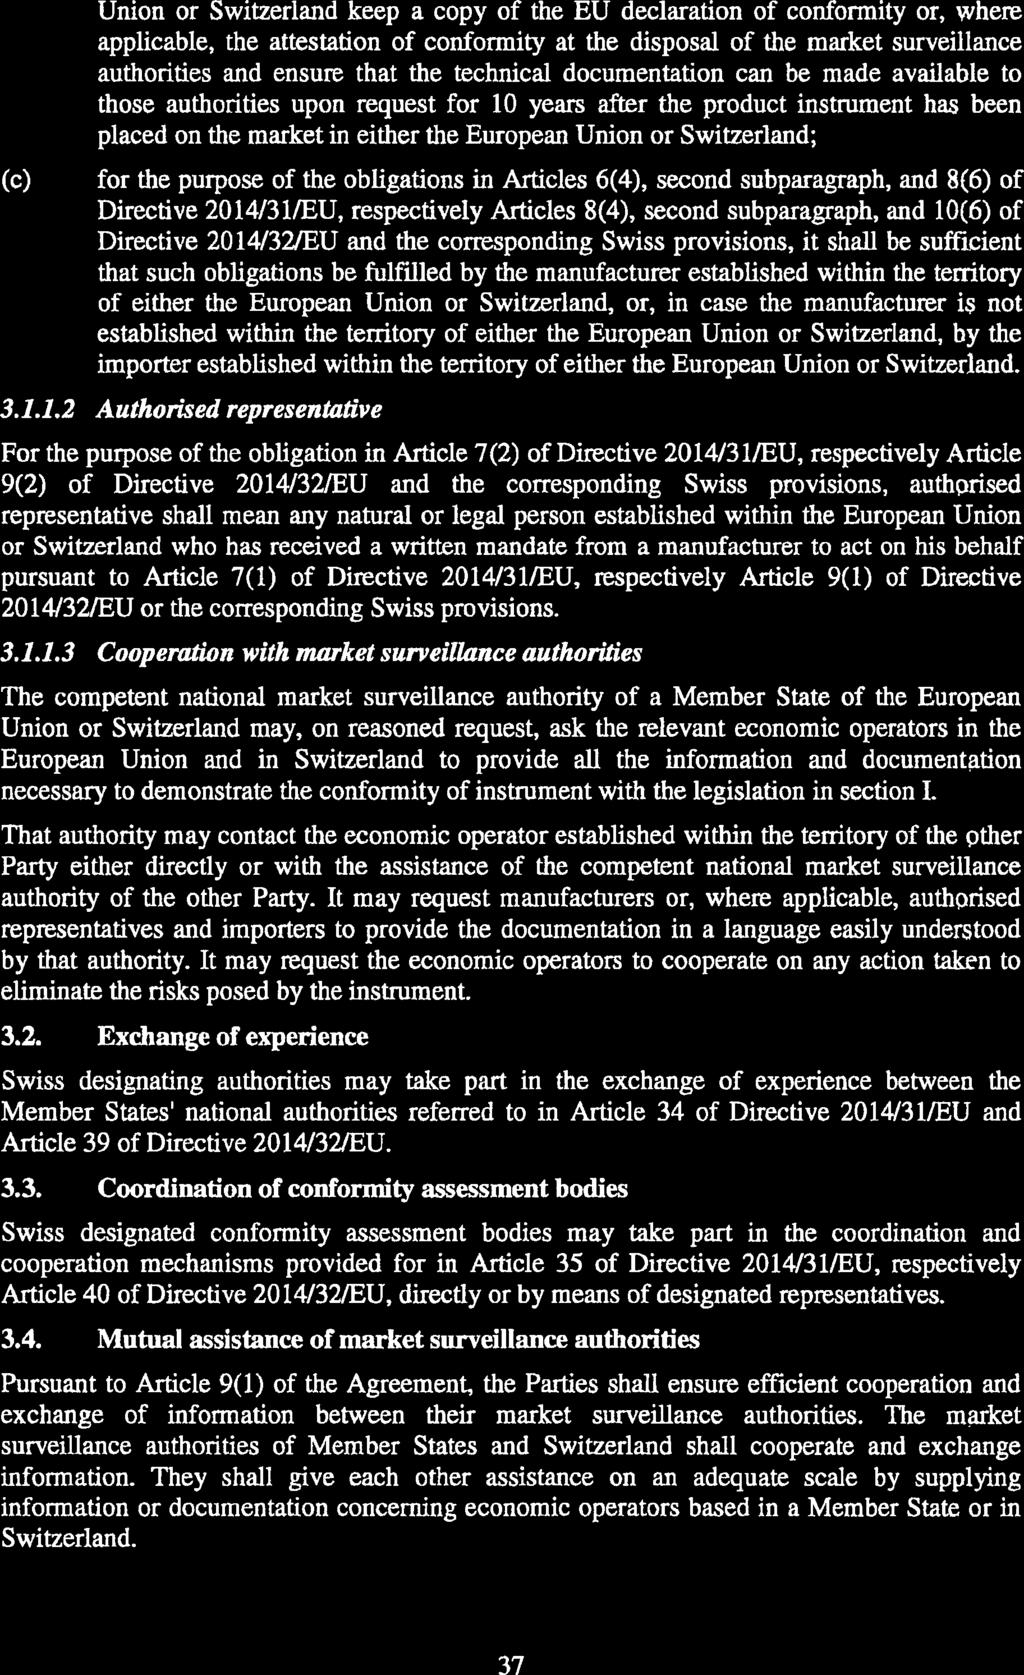 (c) Union or Switzerland keep a copy of the EU declaration of conformity or, where applicable, the attestation of conformity at the disposal of the market surveillance authorities and ensure that the